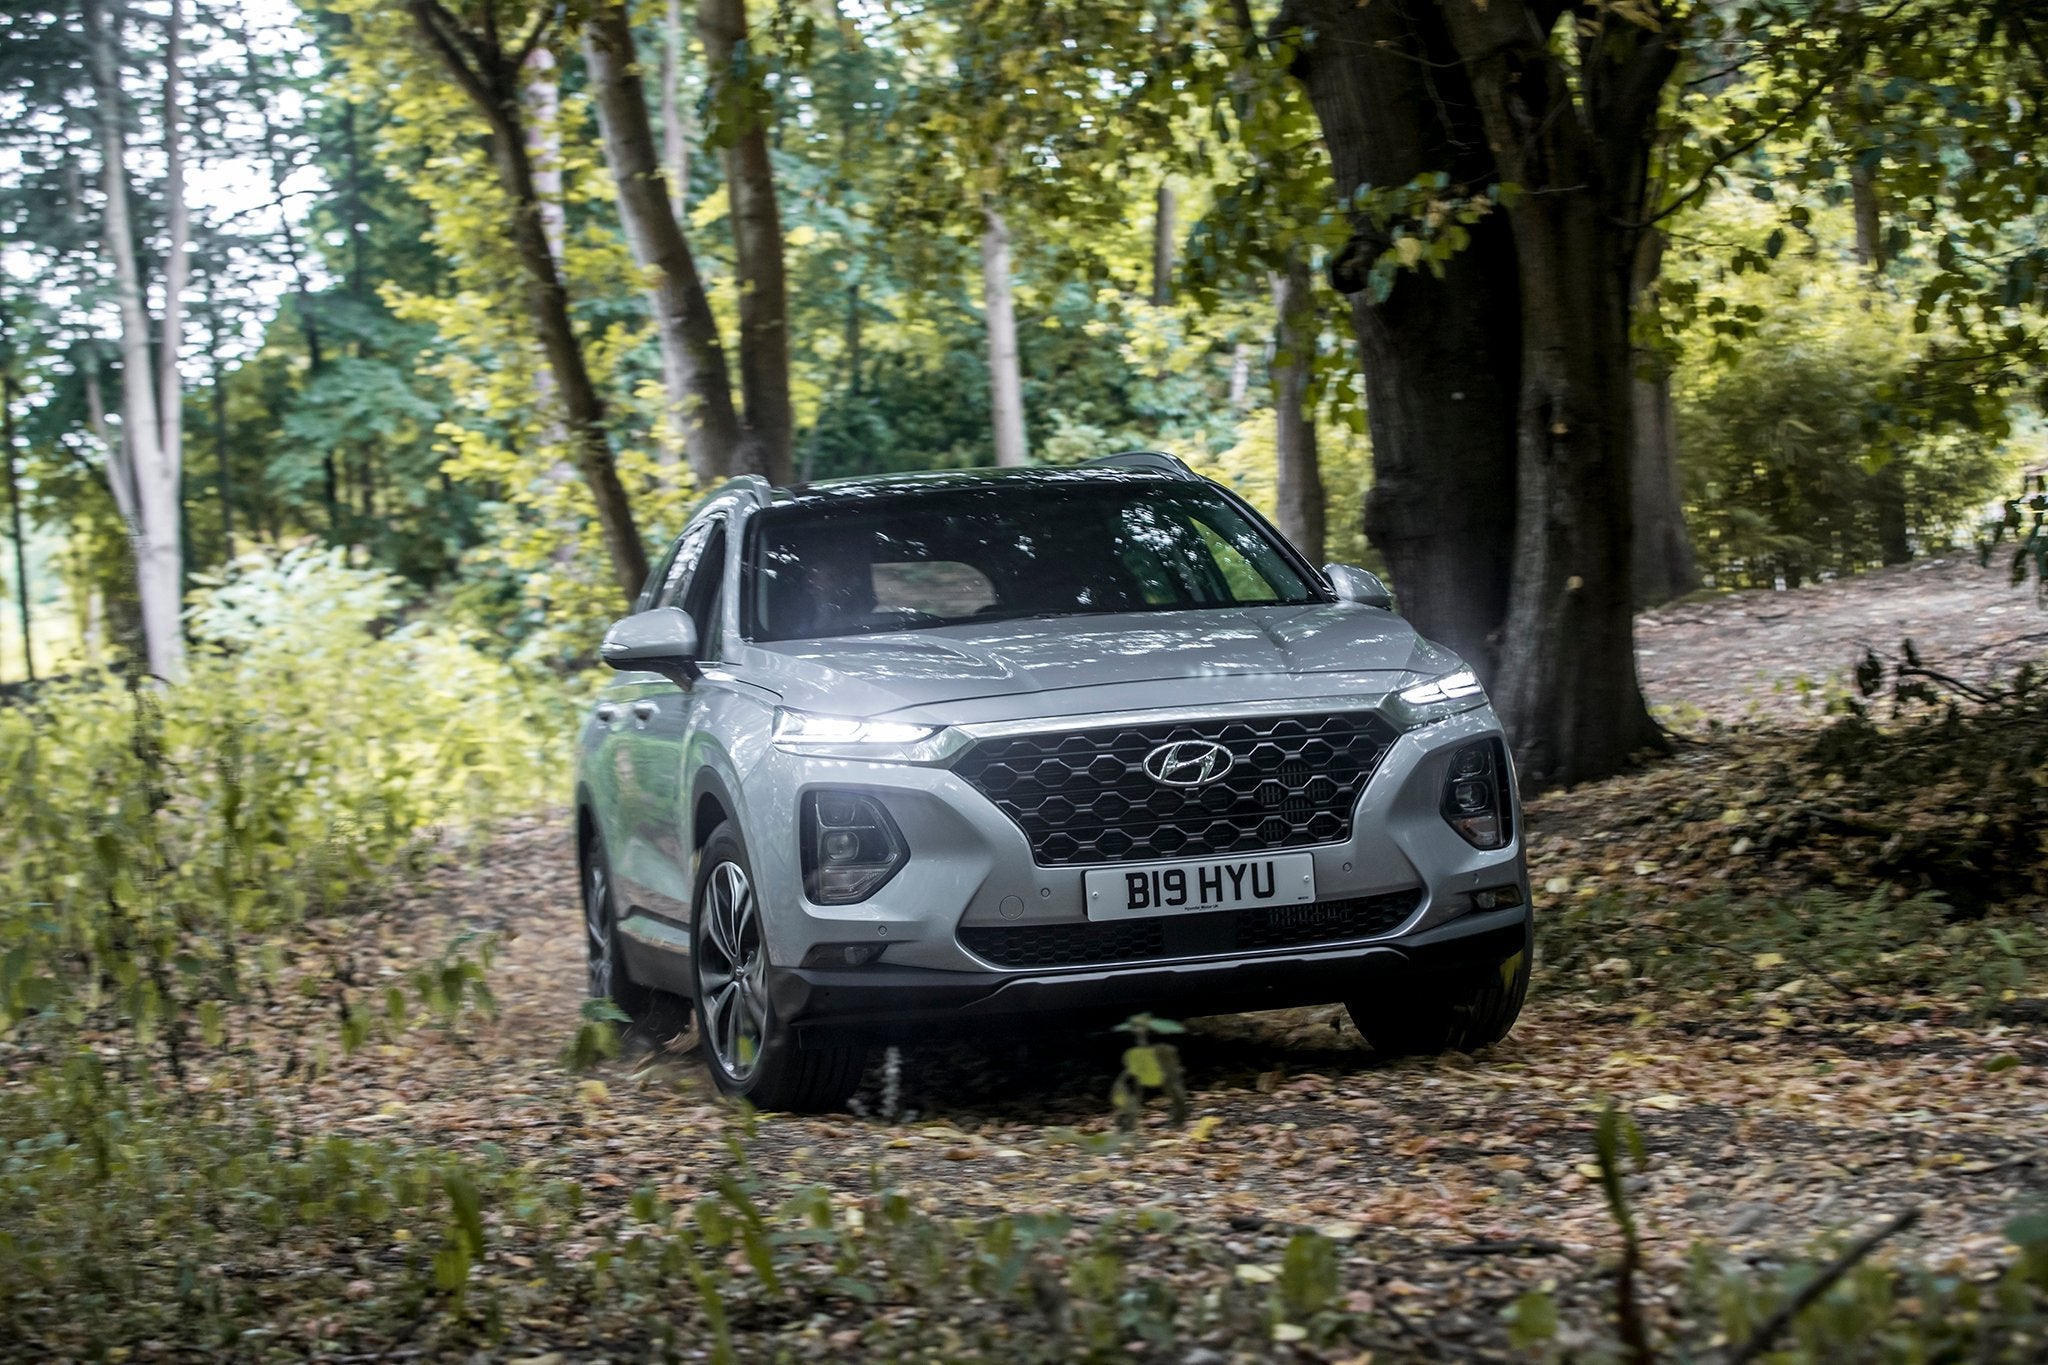 Hyundai has got the balance just right – the looks are relatively pleasing, and fashionable